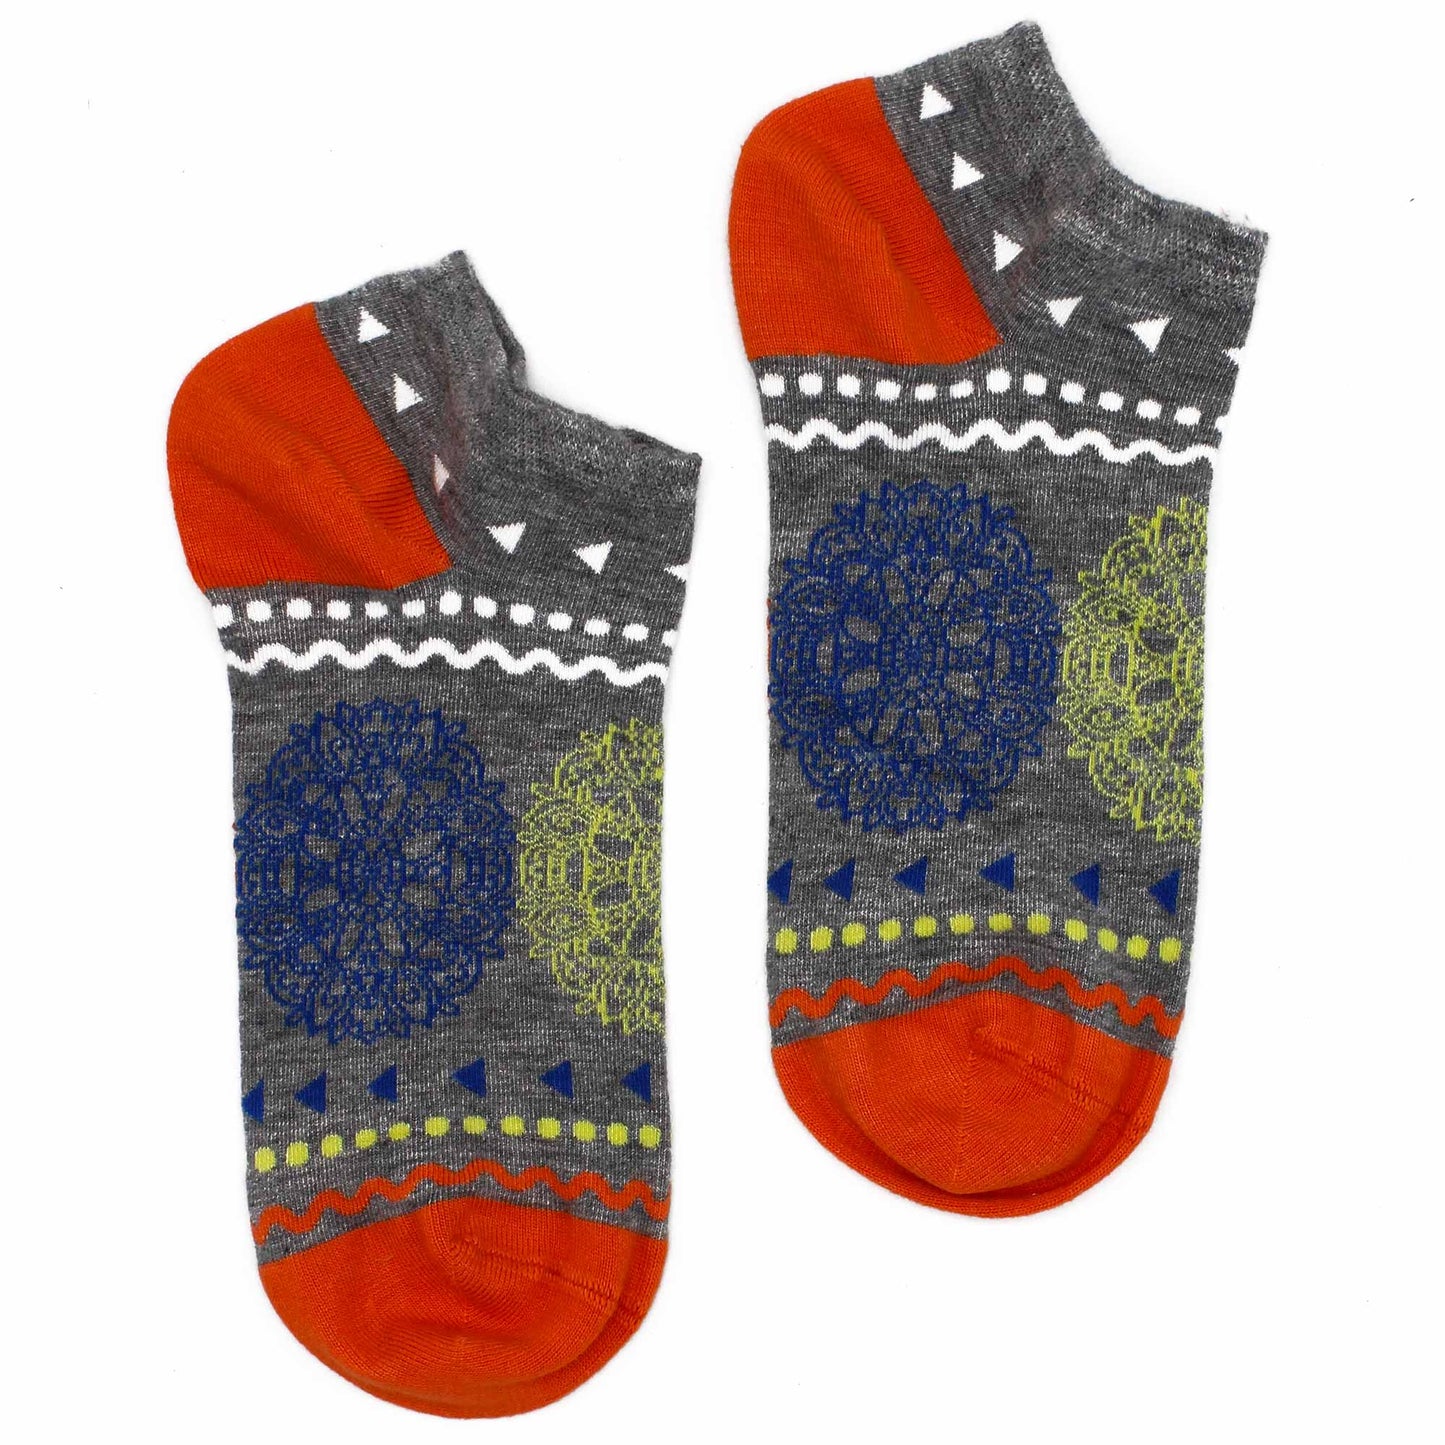 S/M Hop Hare Bamboo Socks Low (3.5-6.5) - Flowers of Life